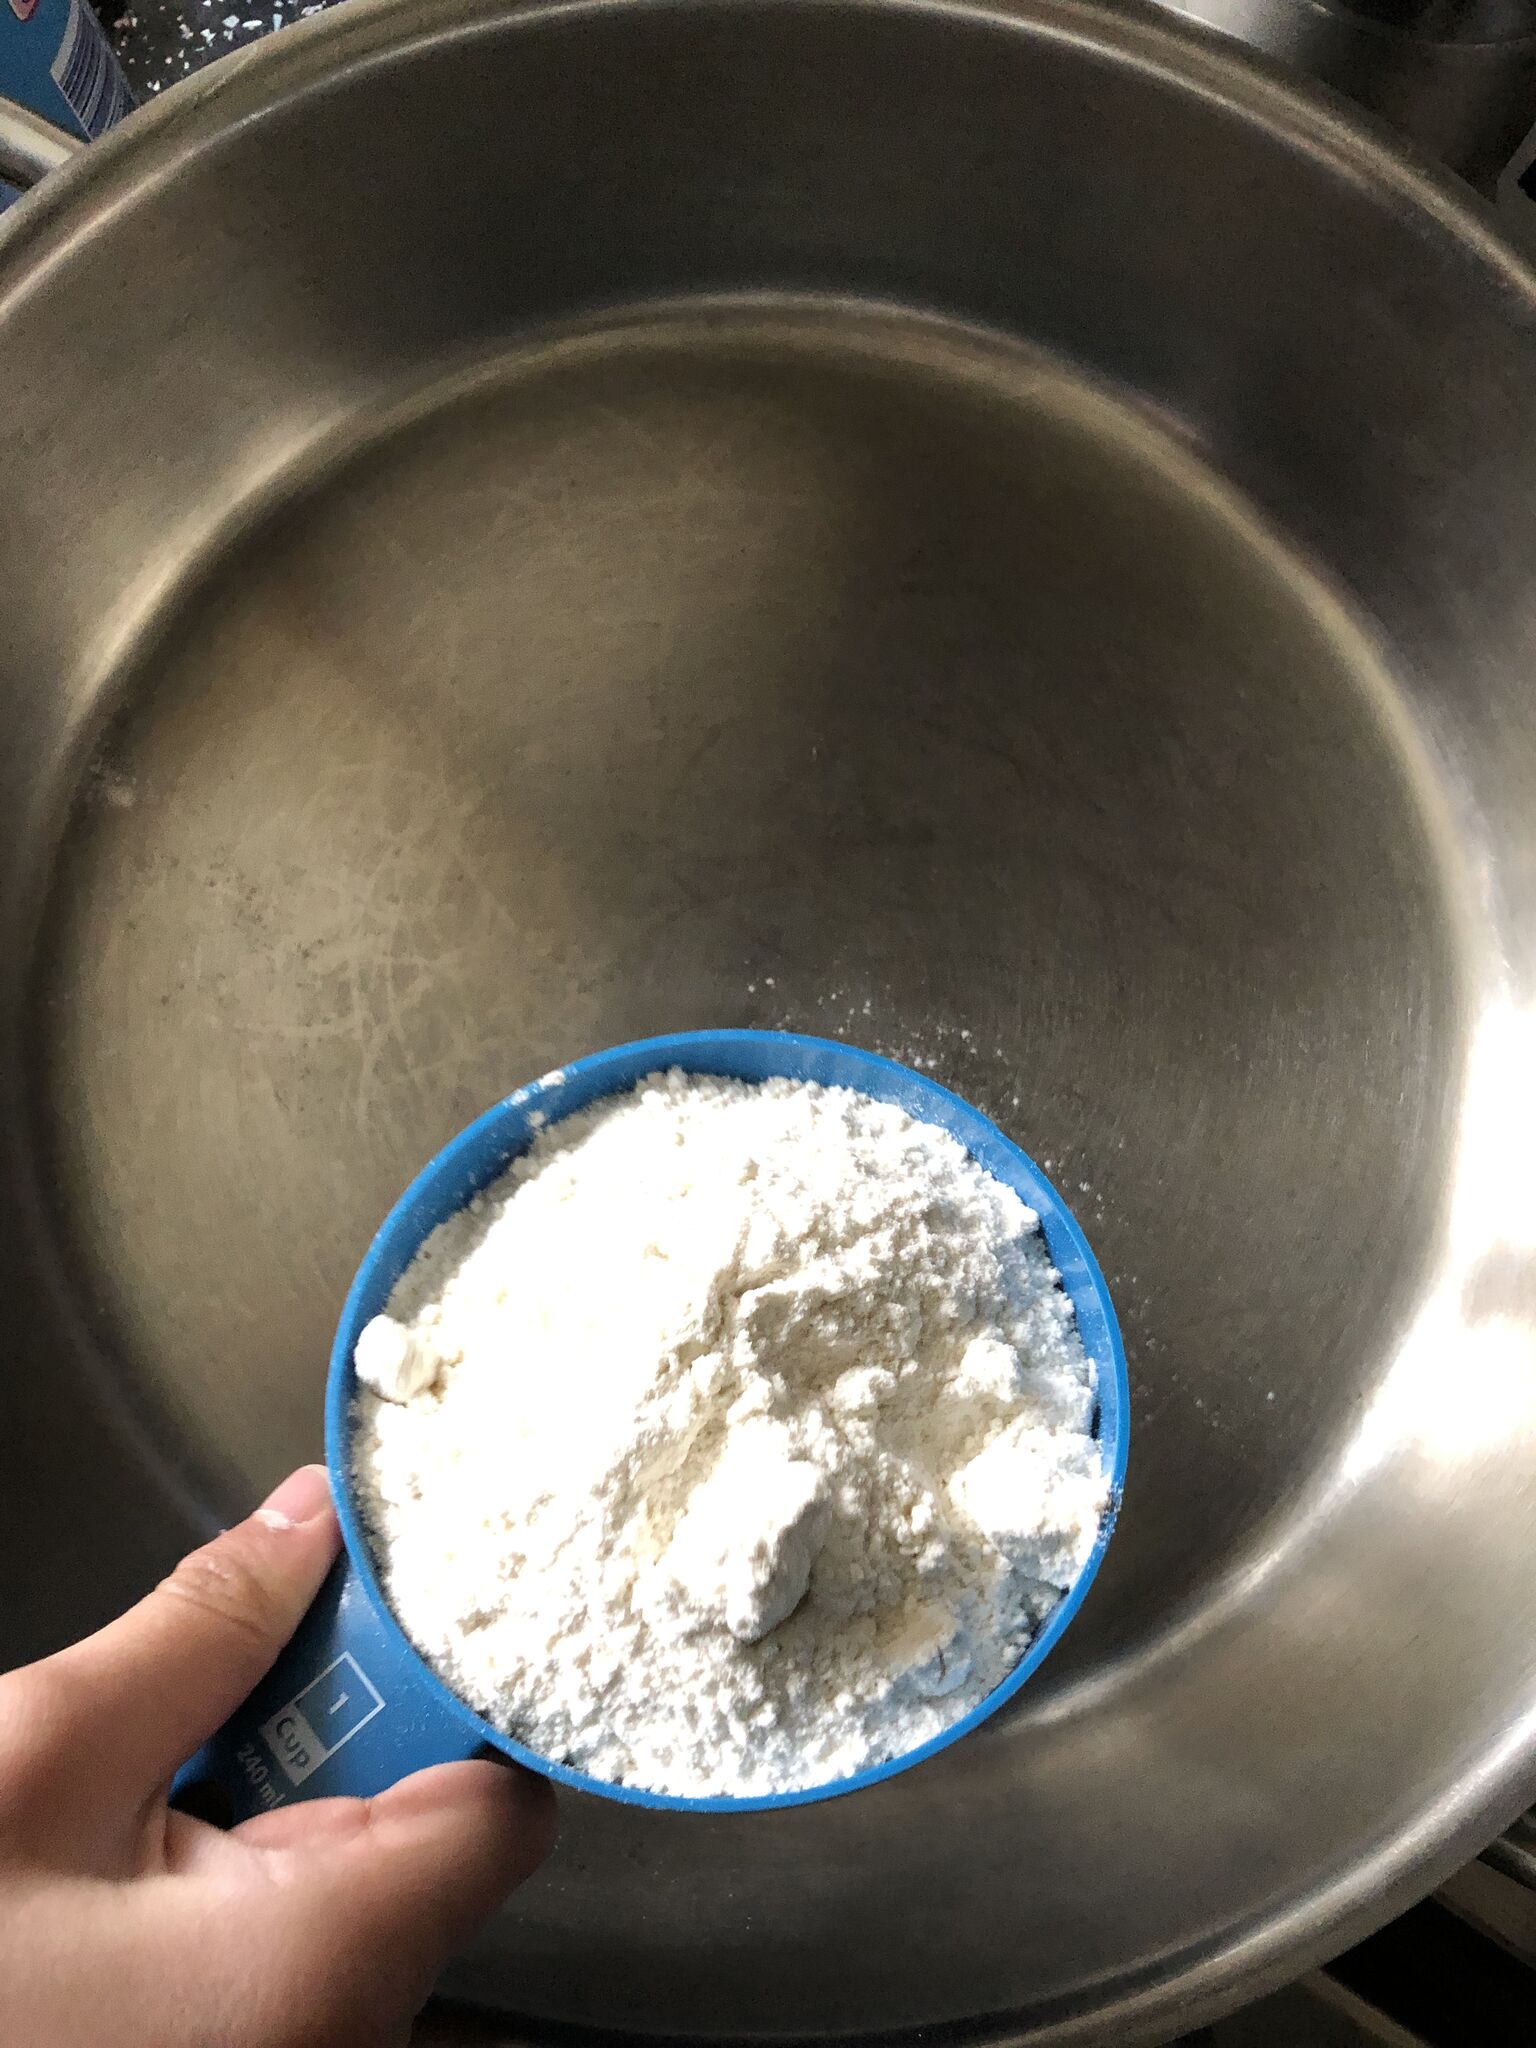 Putting a cup of flour into a heated pan 